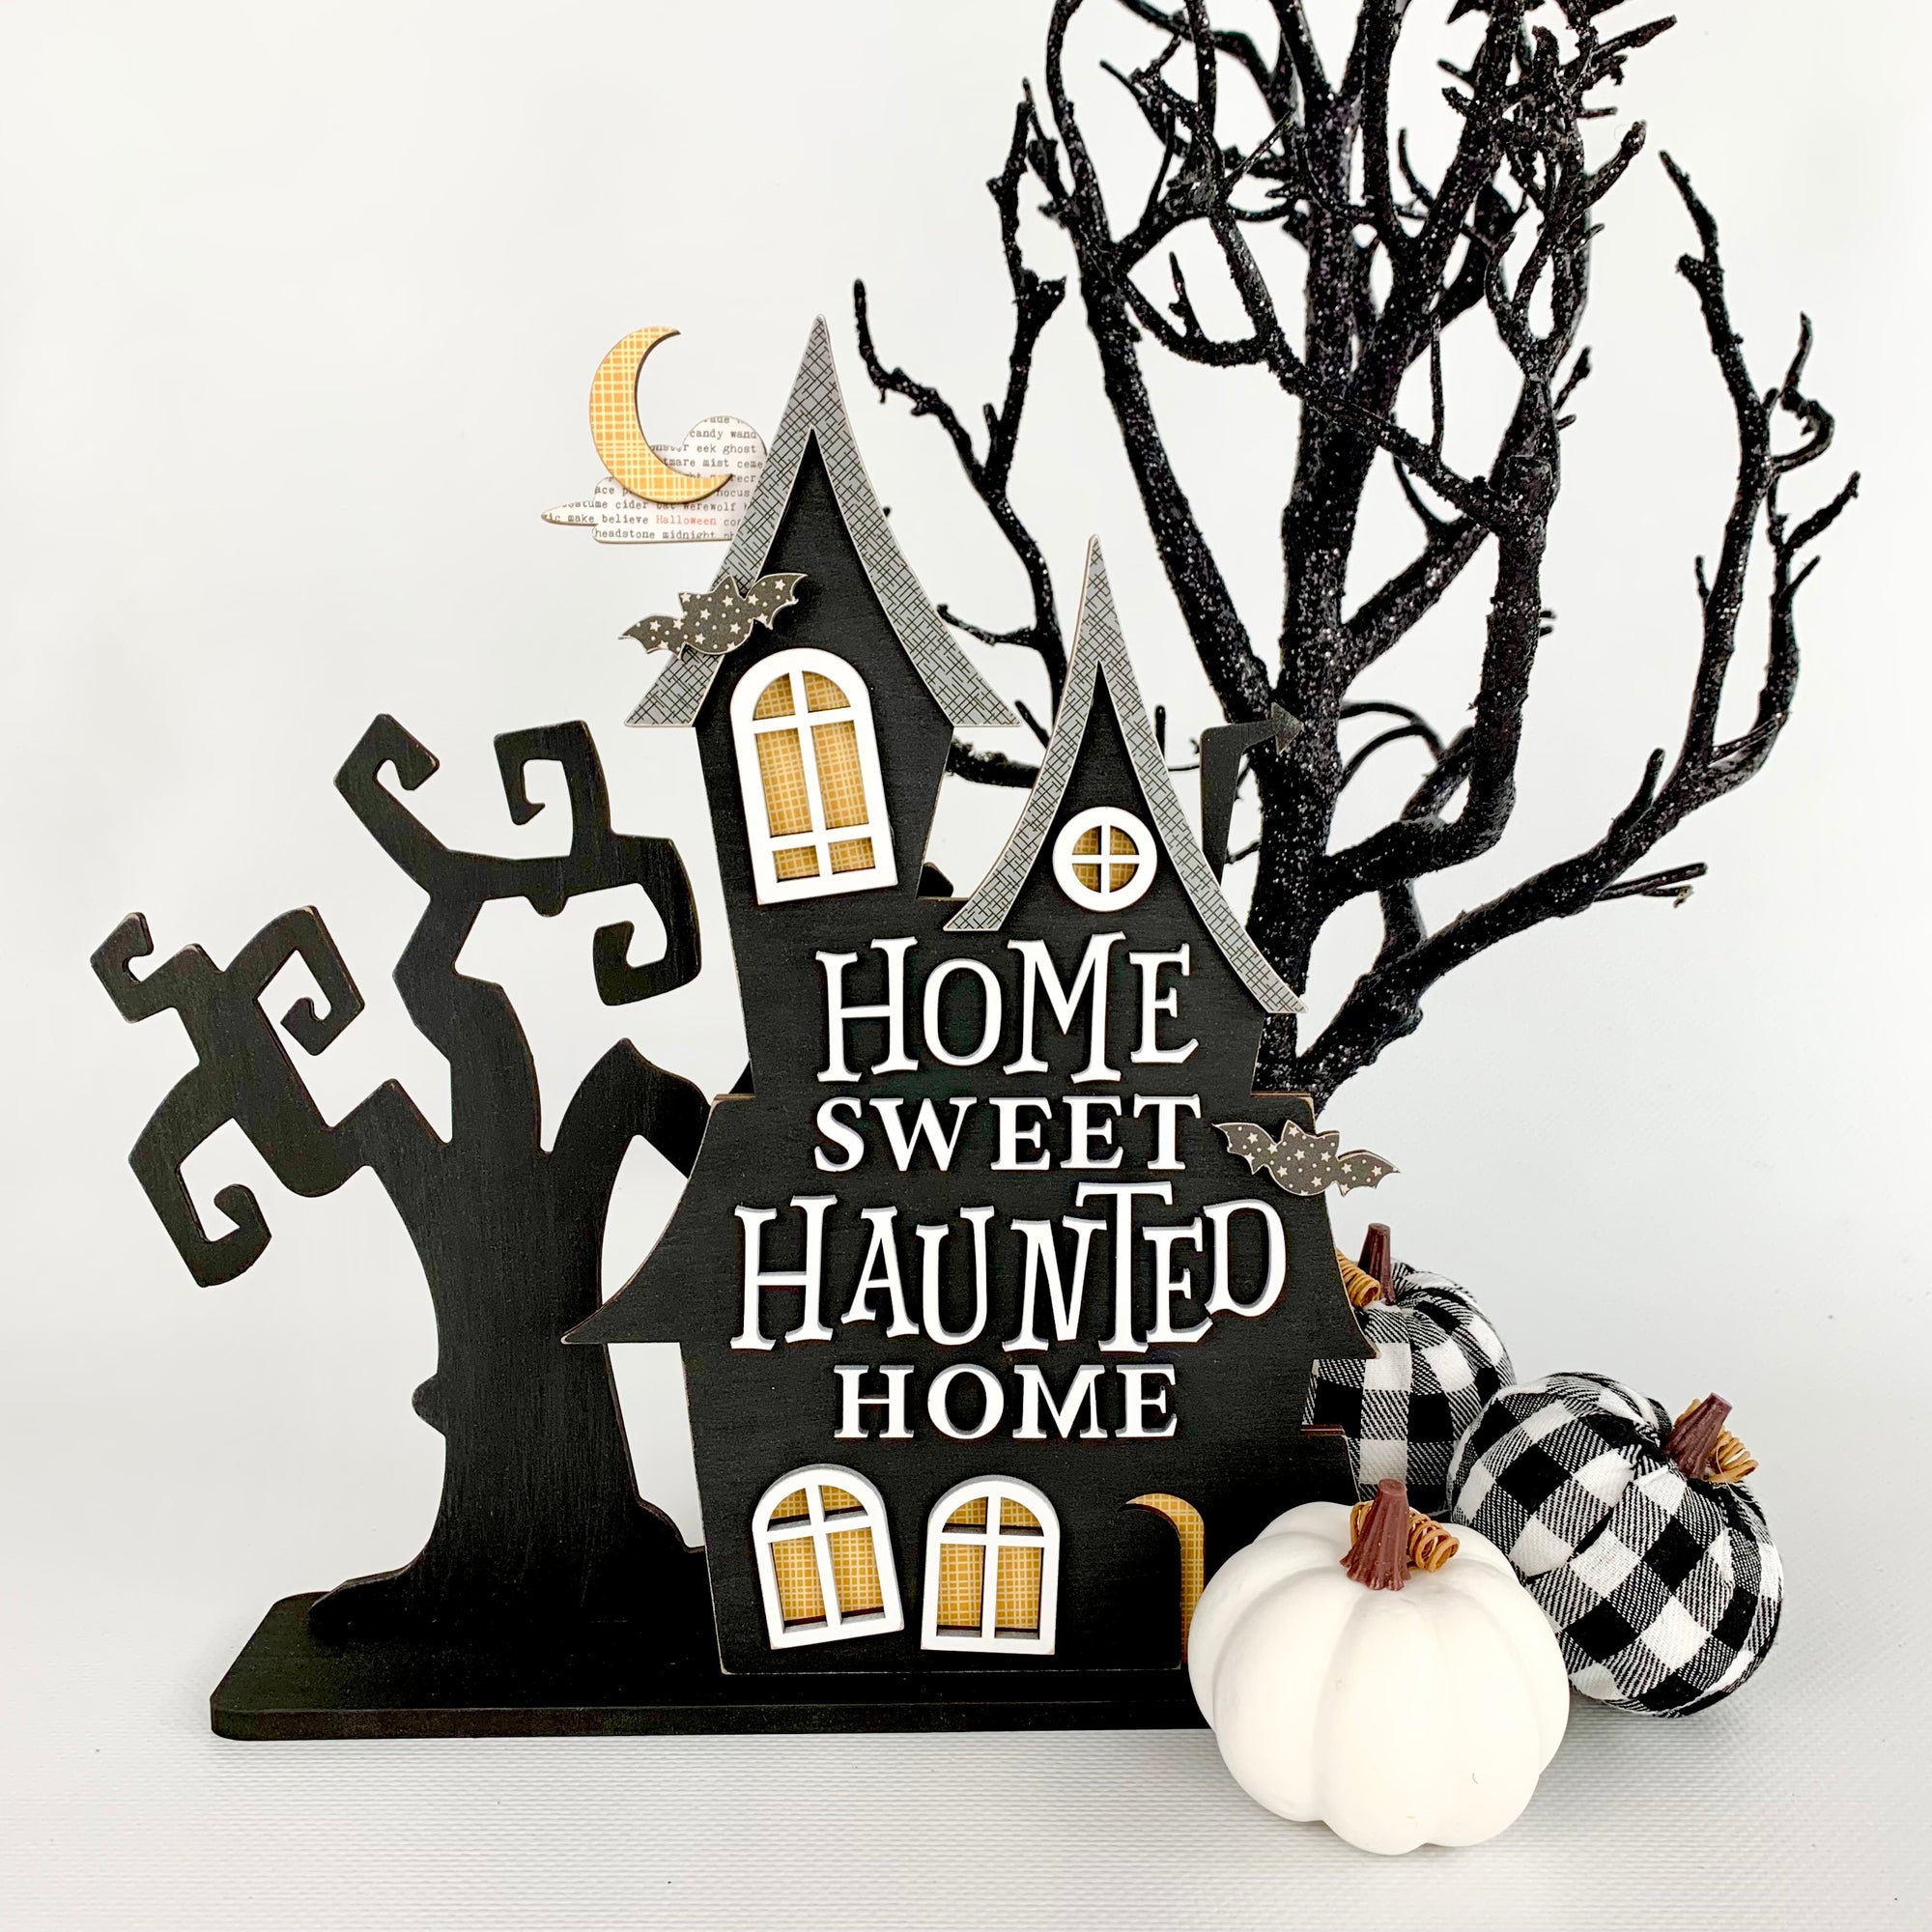 Halloween black and white wood haunted house with a Home sweet haunted home phrase, windows, bats, and a spooky tree.  Haunted house for Halloween home decor.  Halloween wood craft kit.